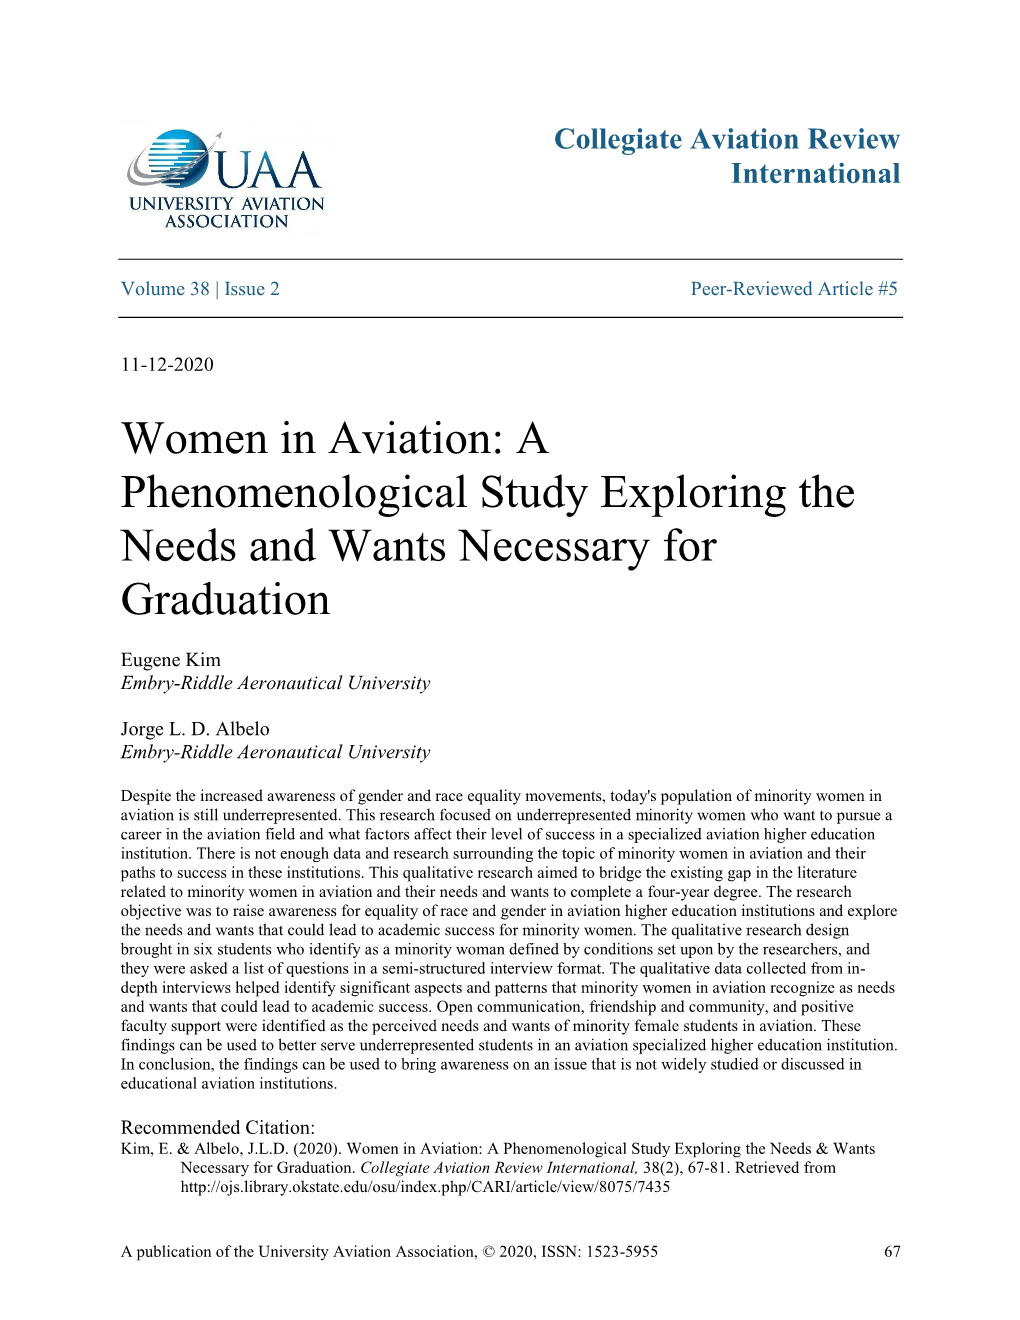 Women in Aviation: a Phenomenological Study Exploring the Needs and Wants Necessary For